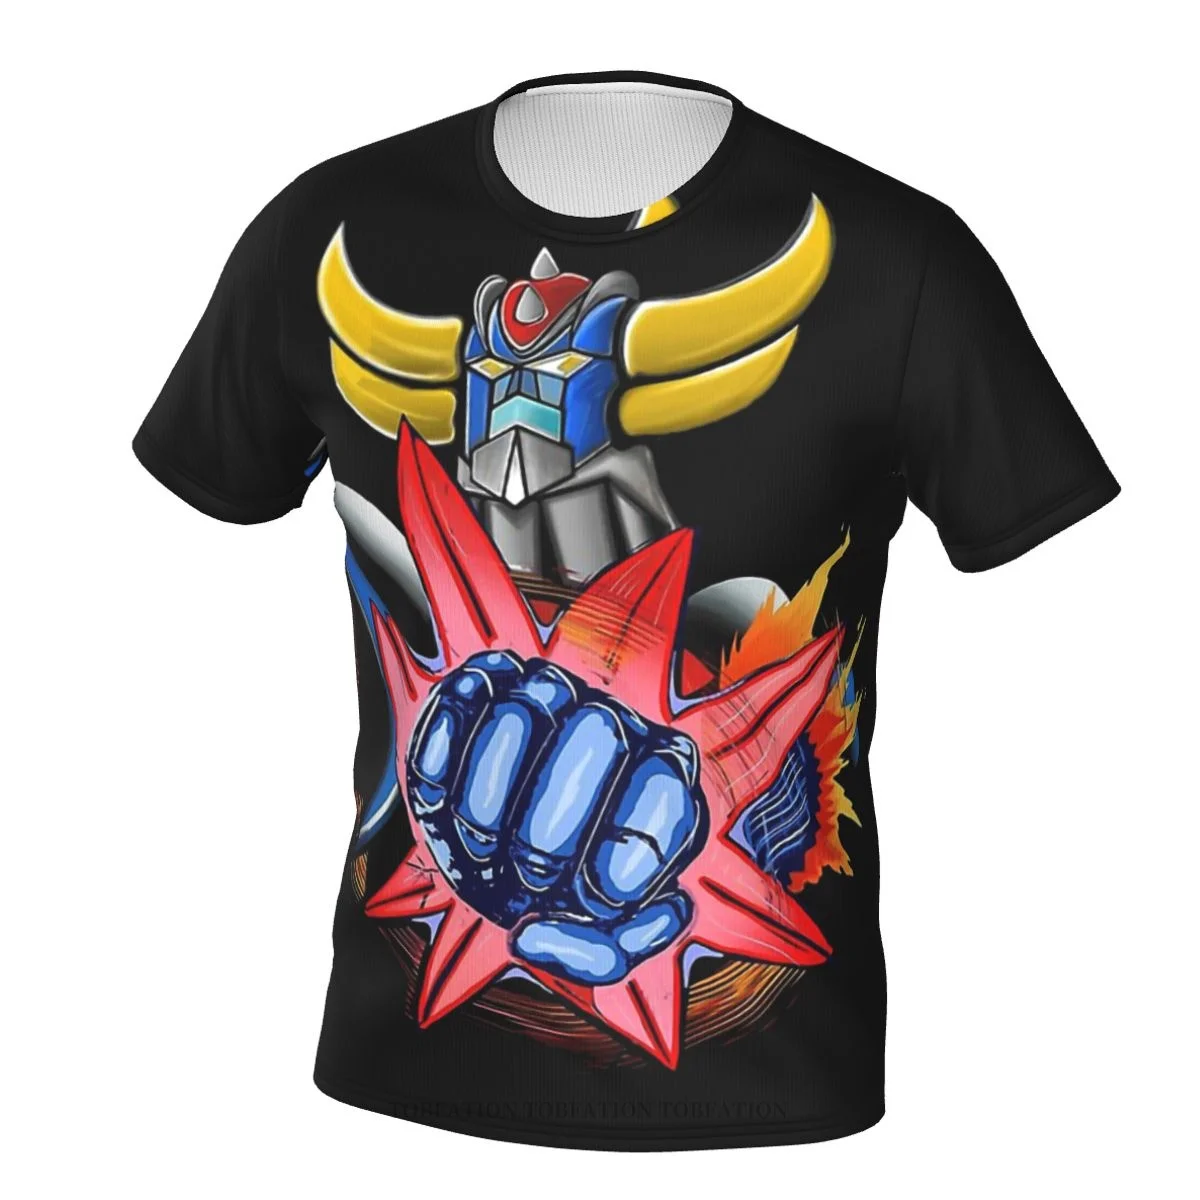 

Steel Head UFO Robot Grendizer Robot Wars Save The Peace Polyester Print T Shirt Outdoor Sports Quick-drying Clothes